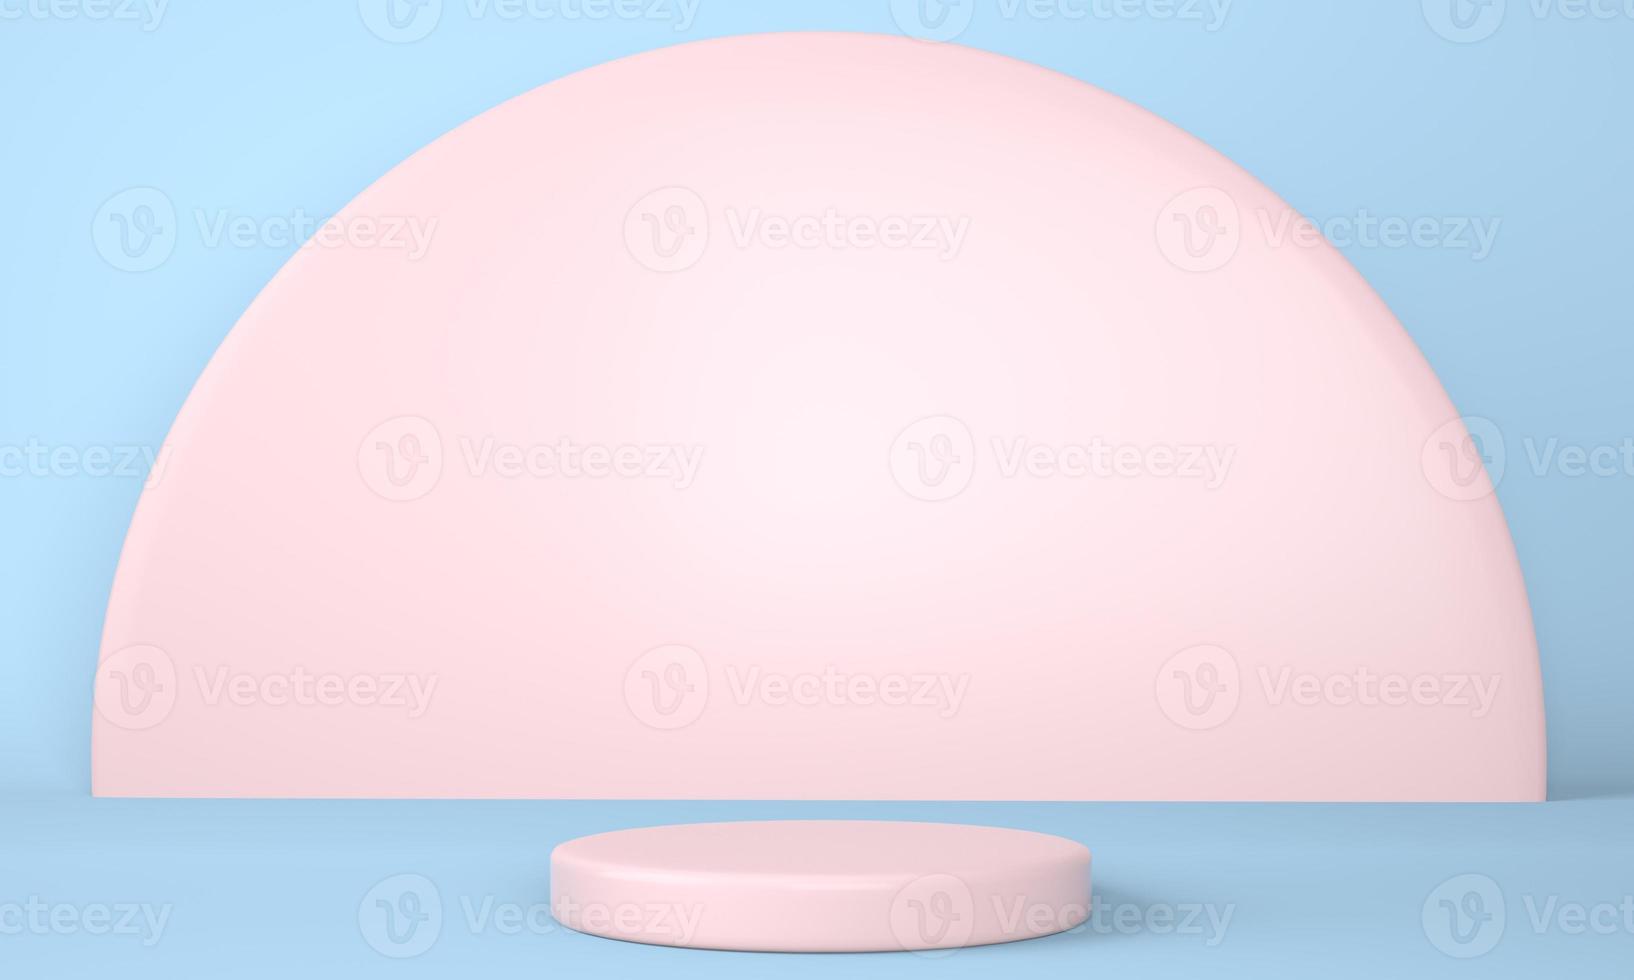 Product podium on pastel background 3d. Abstract minimal geometry concept. Studio stand platform theme. Exhibition and business marketing presentation stage. photo